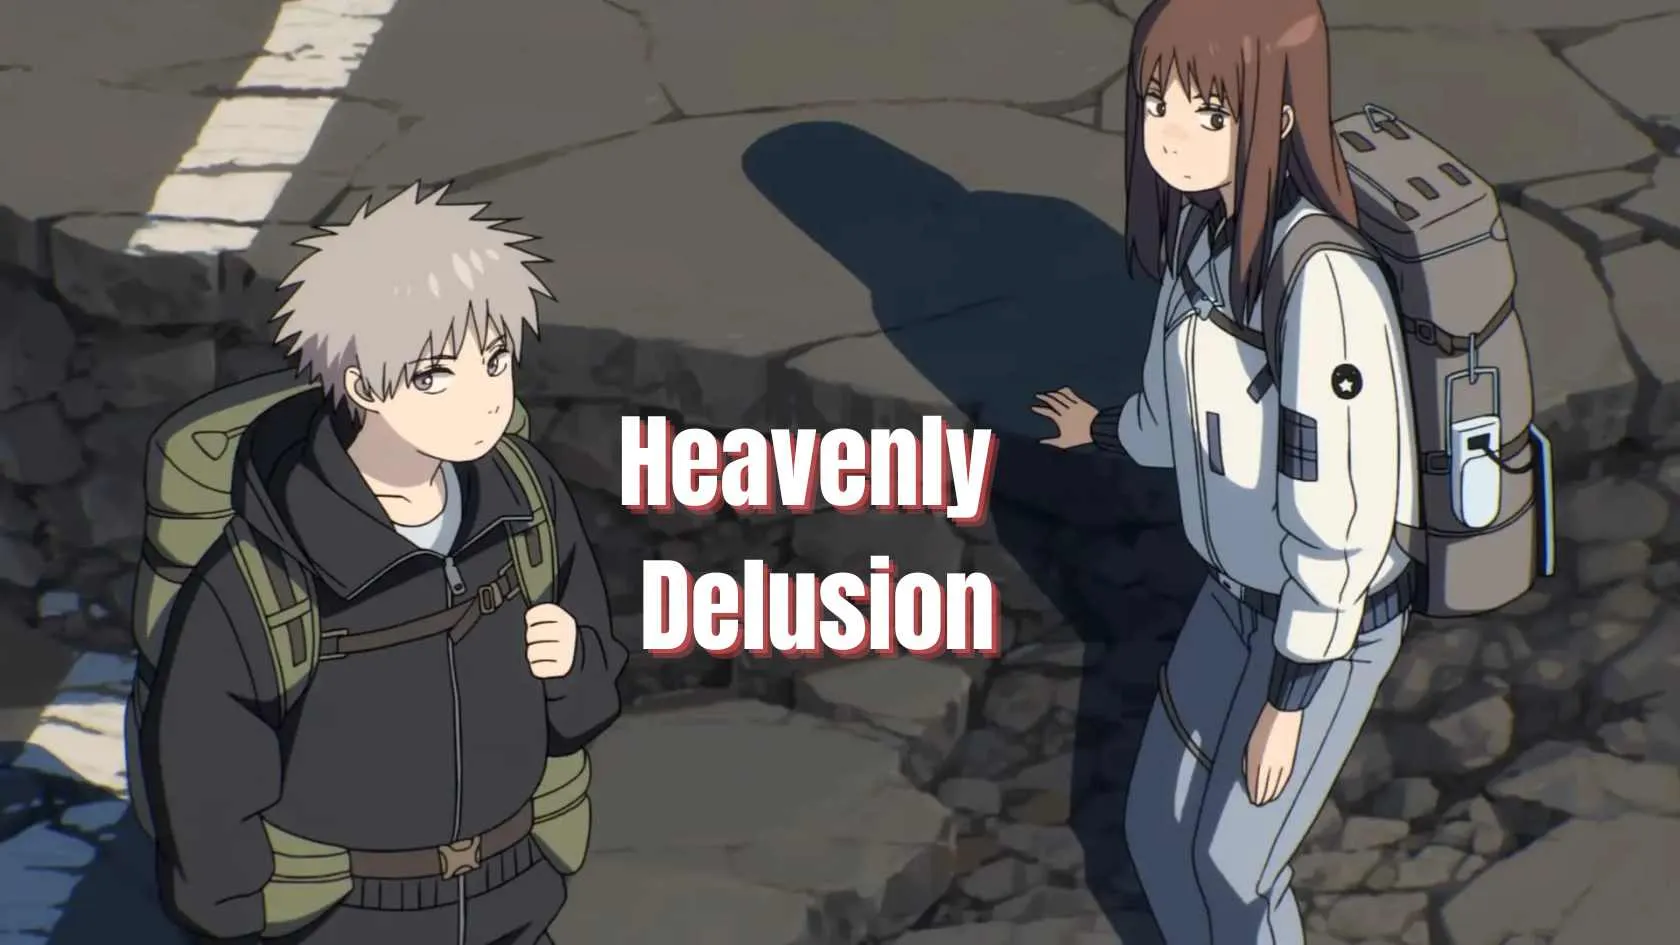 Heavenly Delusion: Main Characters' Ages, Genders & More